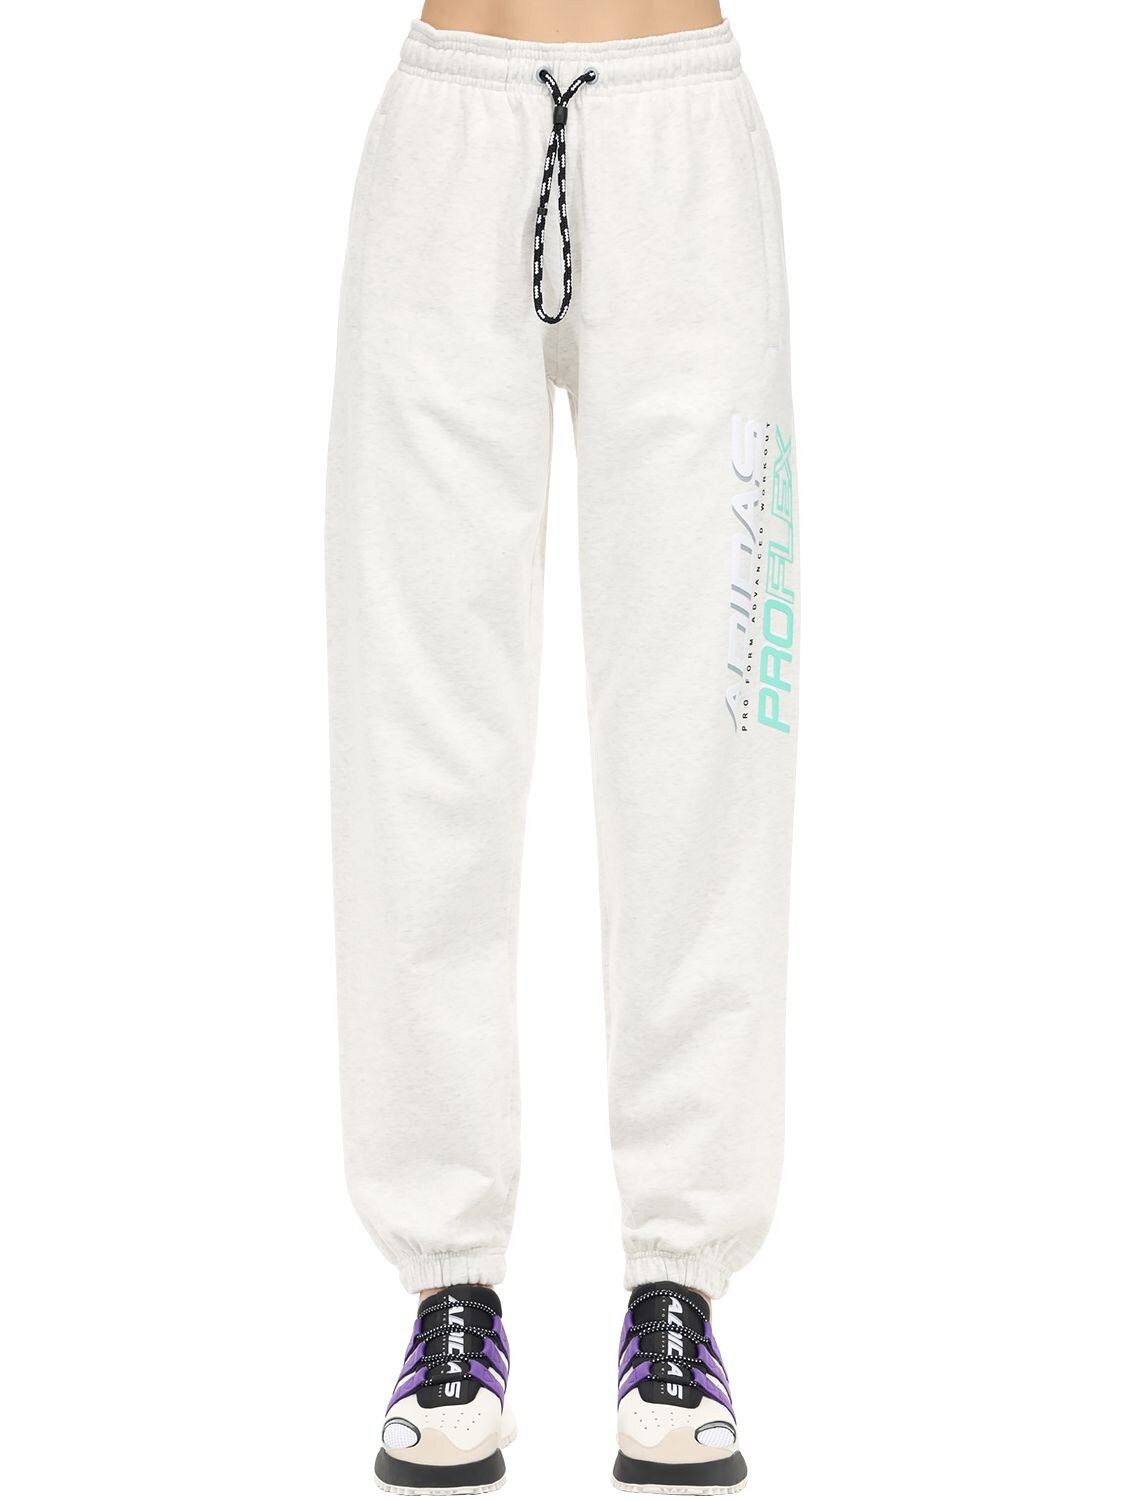 ADIDAS ORIGINALS BY ALEXANDER WANG GRAPHIC COTTON SWEATtrousers,69IRSE013-TEDI0